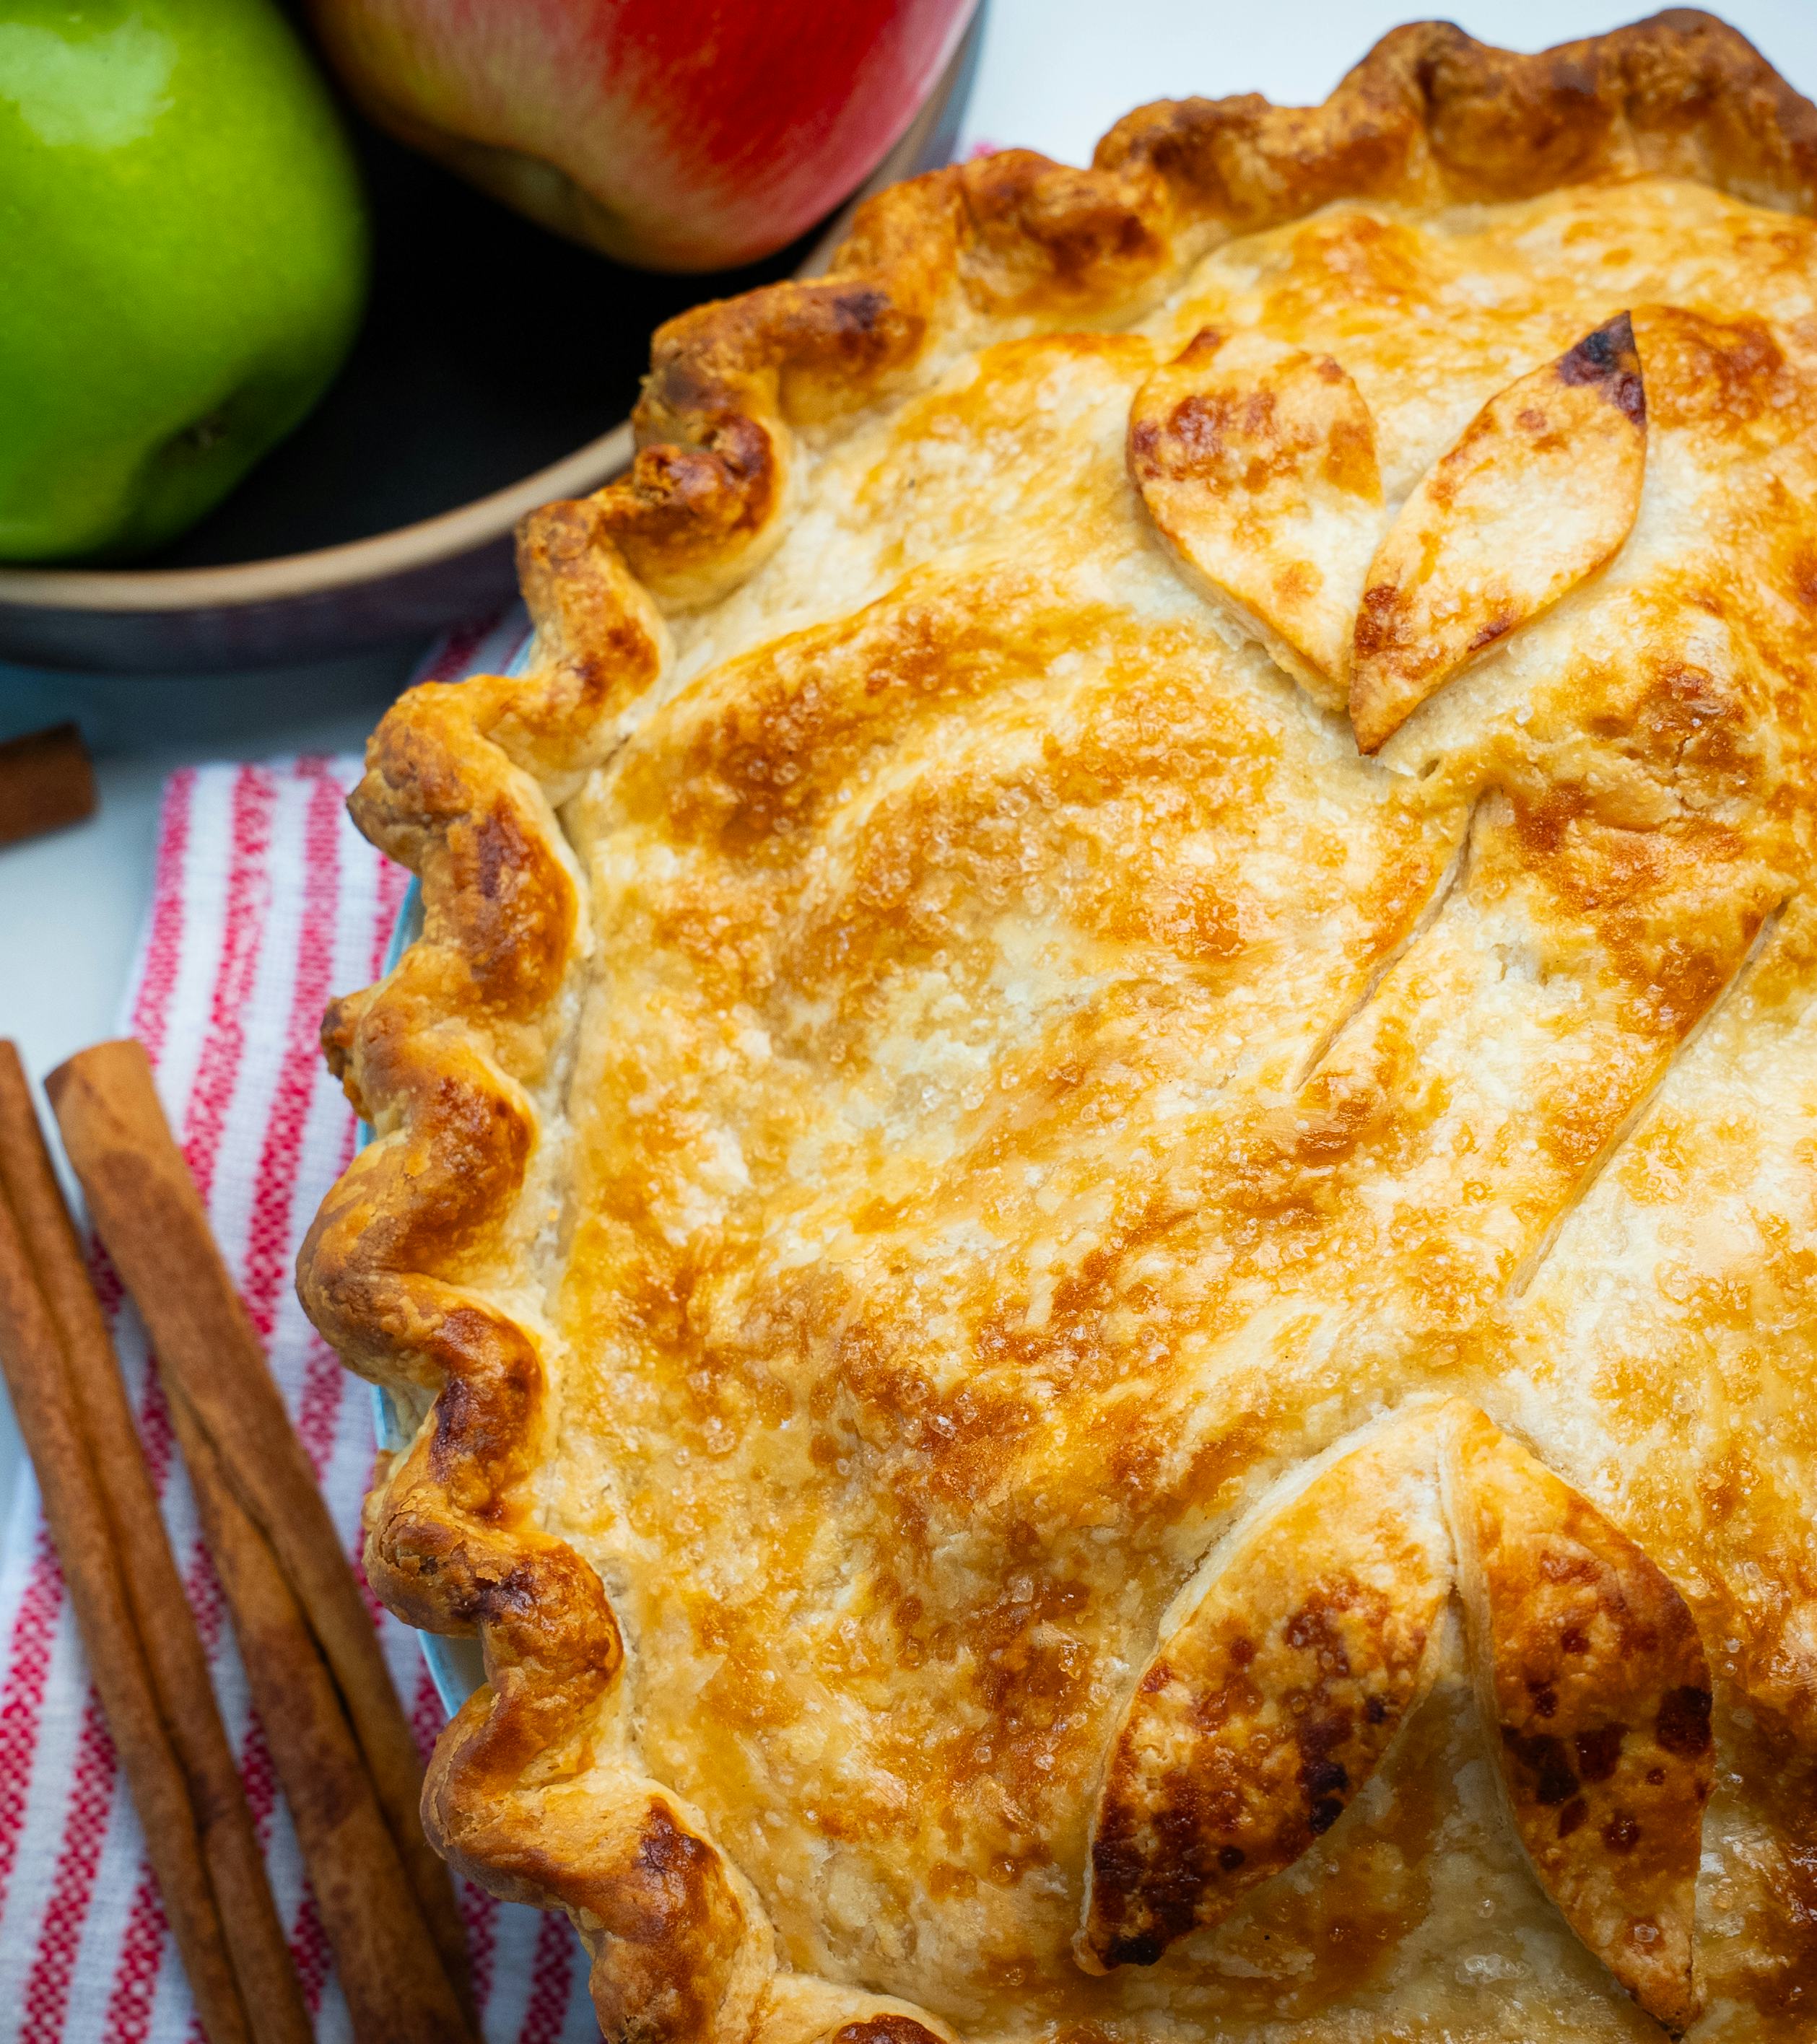 An apple pie with decorated pastry. Next to it are a few cinnamon sticks, and a bowl with two apples.